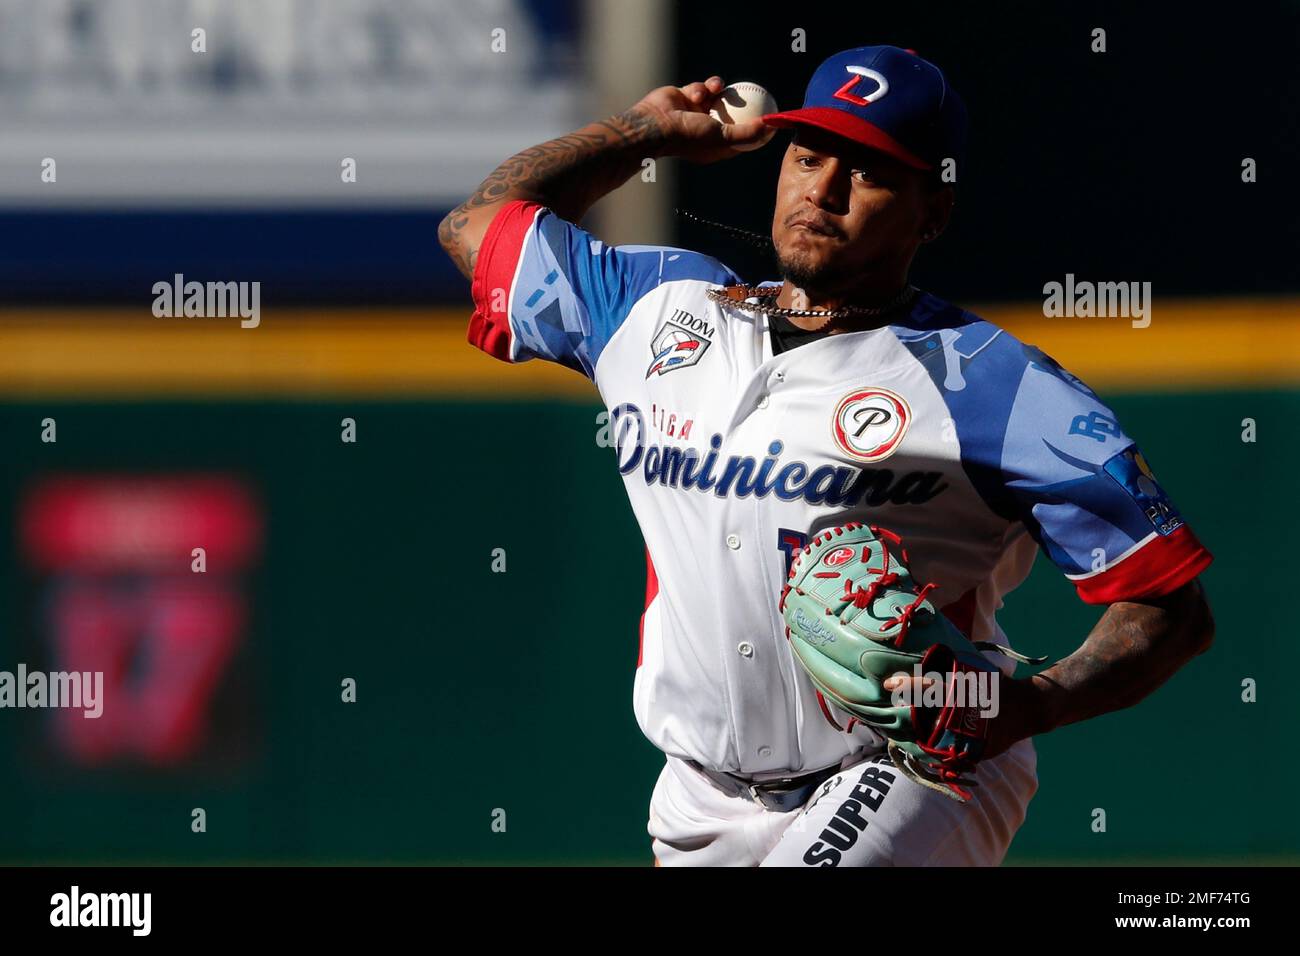 Dominican Republics starting pitcher Carlos Martinez pitches during the first inning of a Caribbean Series baseball game against Panama, at the Teodoro Mariscal stadium in Mazatlan, Mexico, Friday, Feb